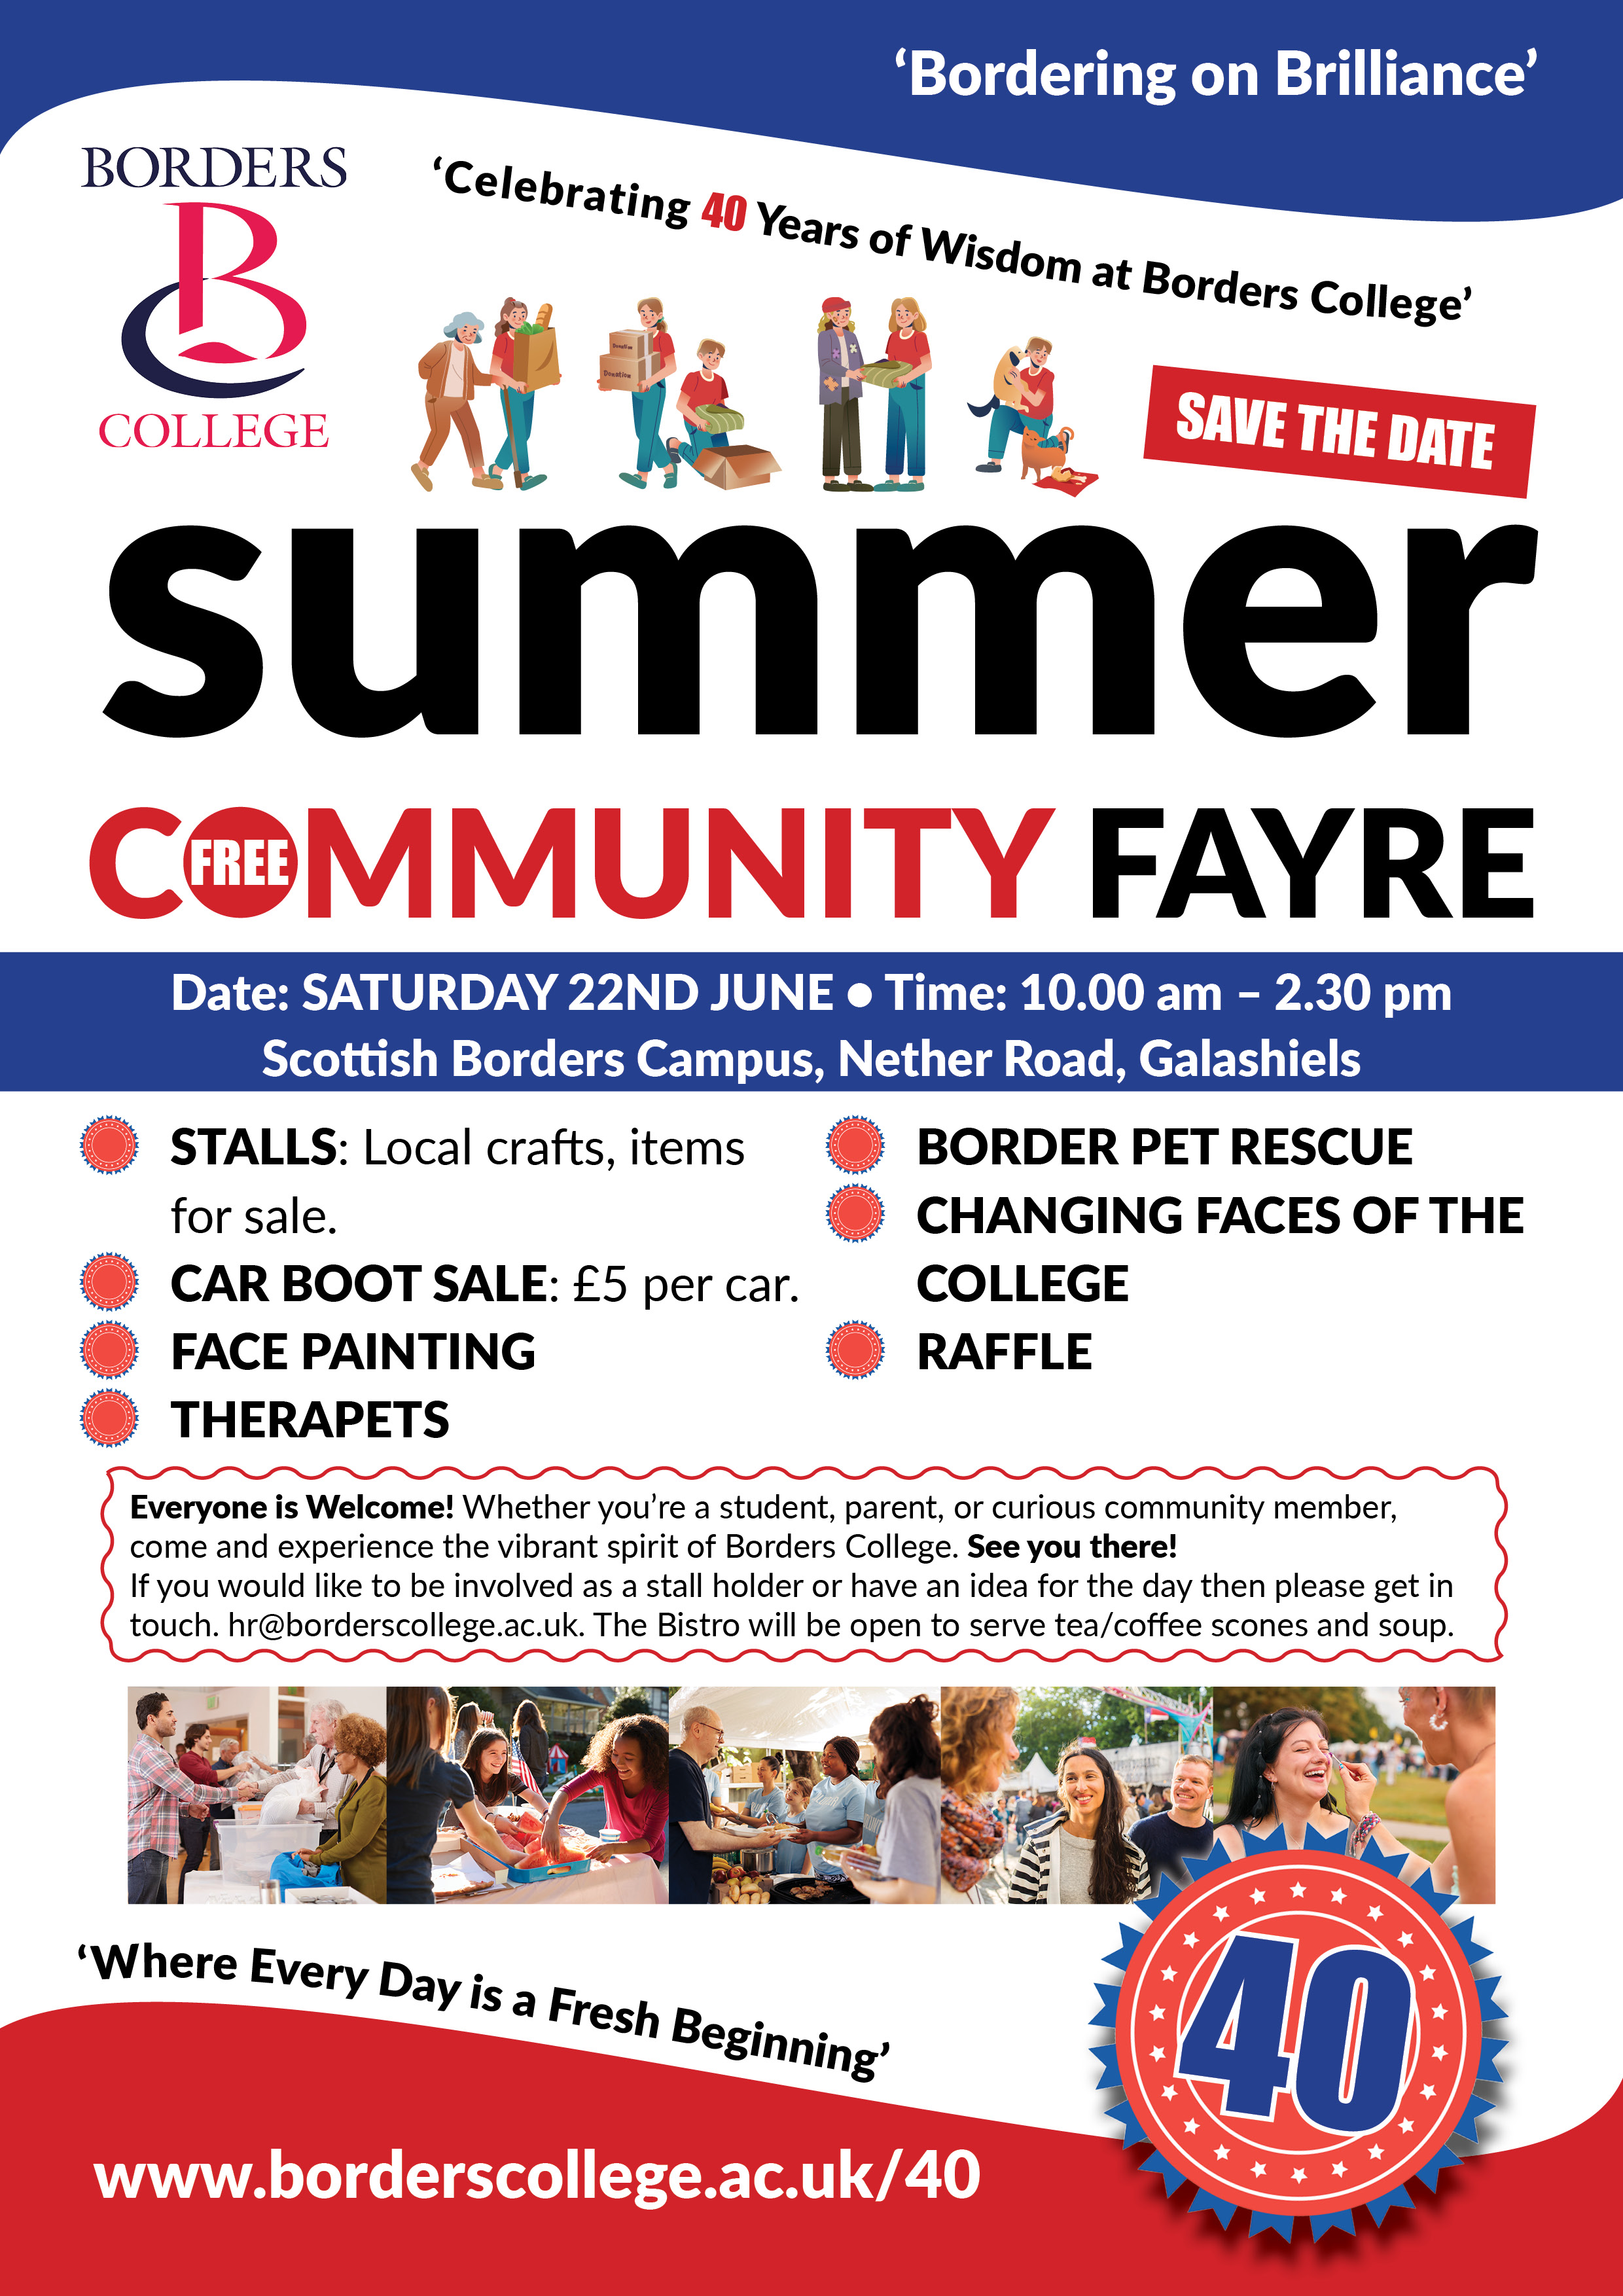 Borders College Summer Community Fair poster. Details as in Community Fair section above.